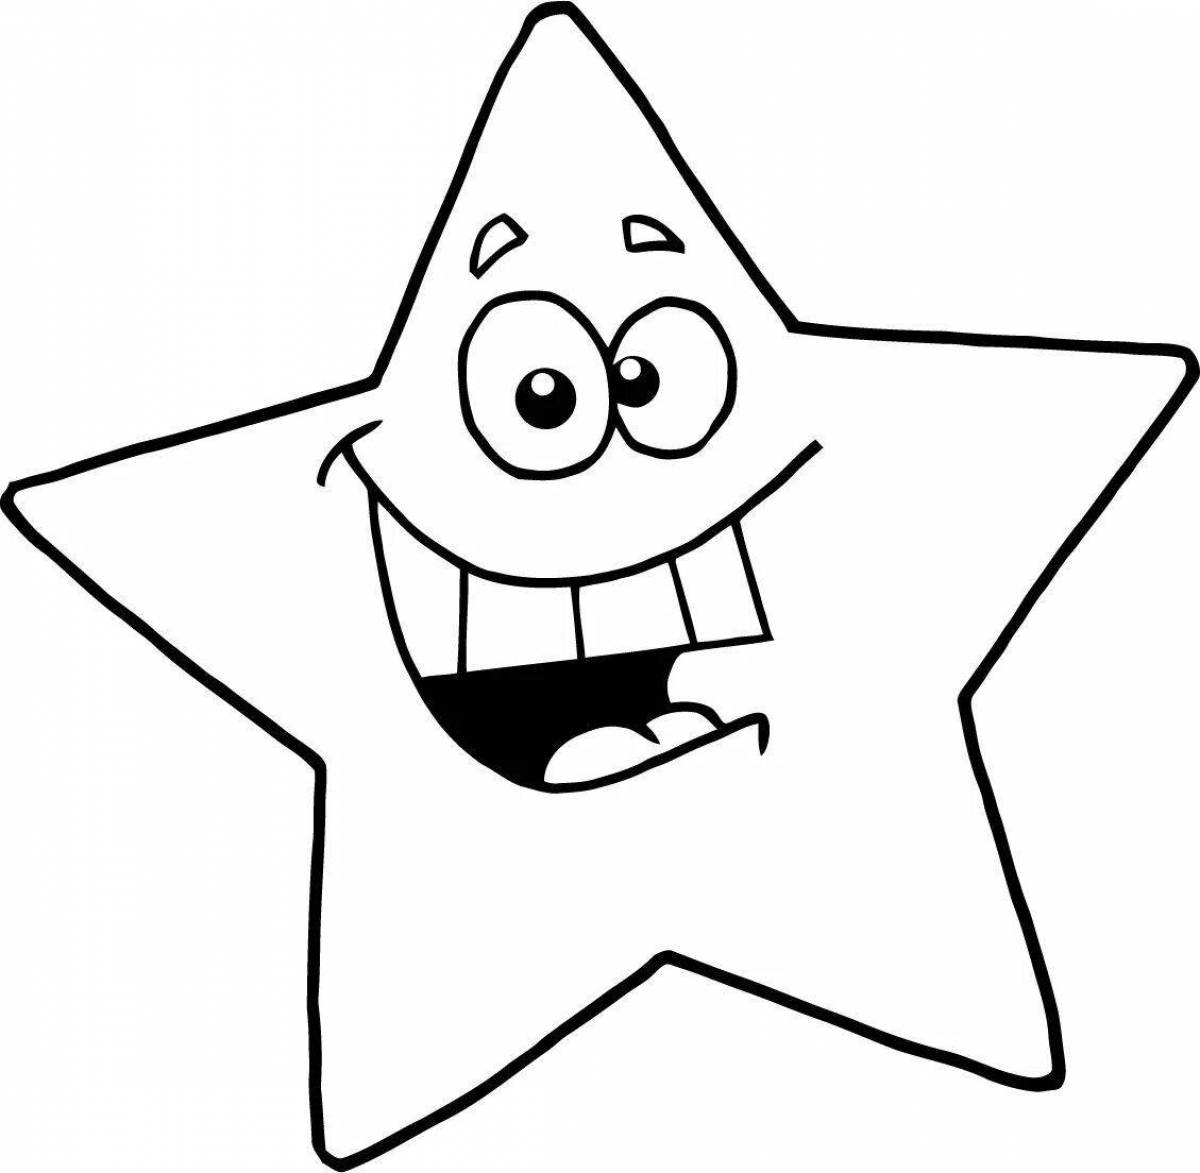 Bright star coloring for preschoolers